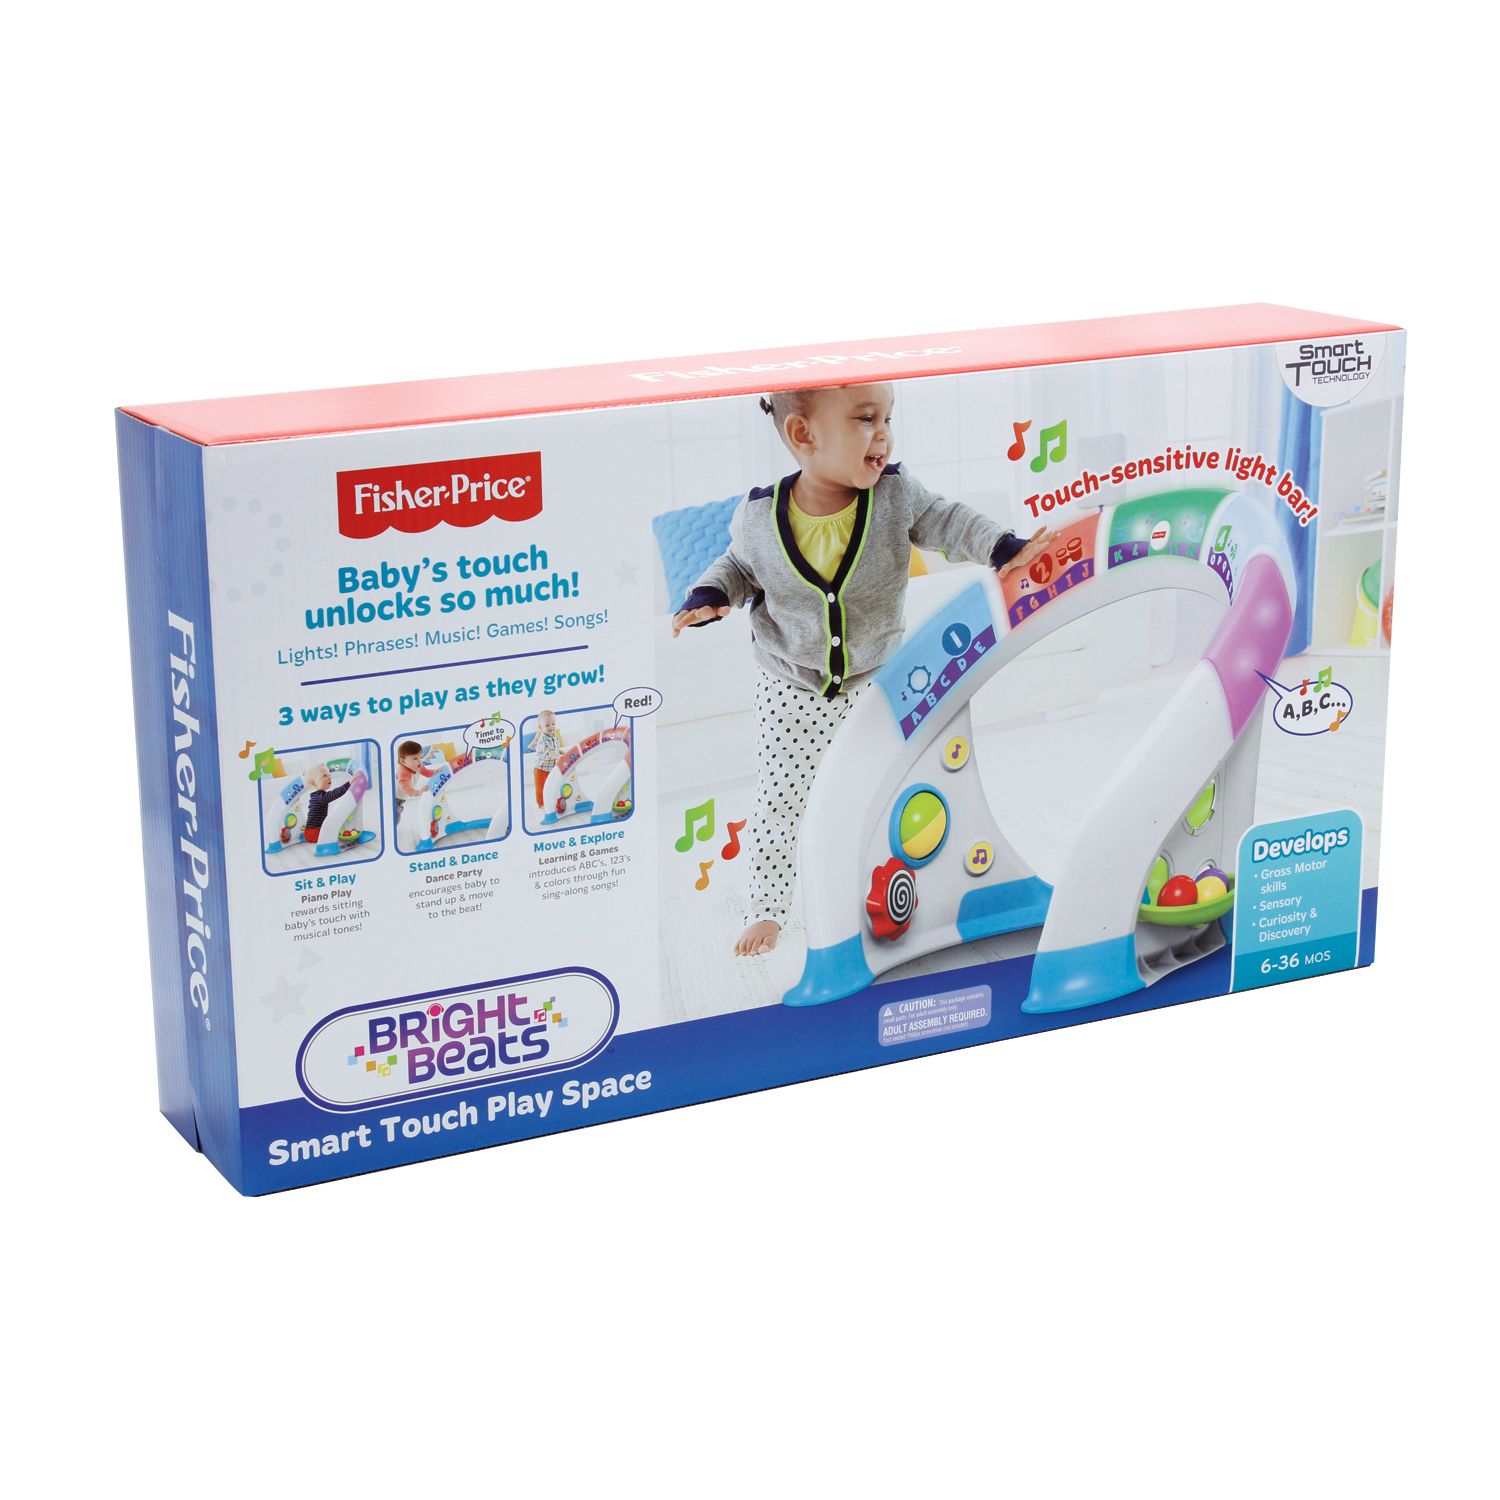 fisher price beats smart touch play space